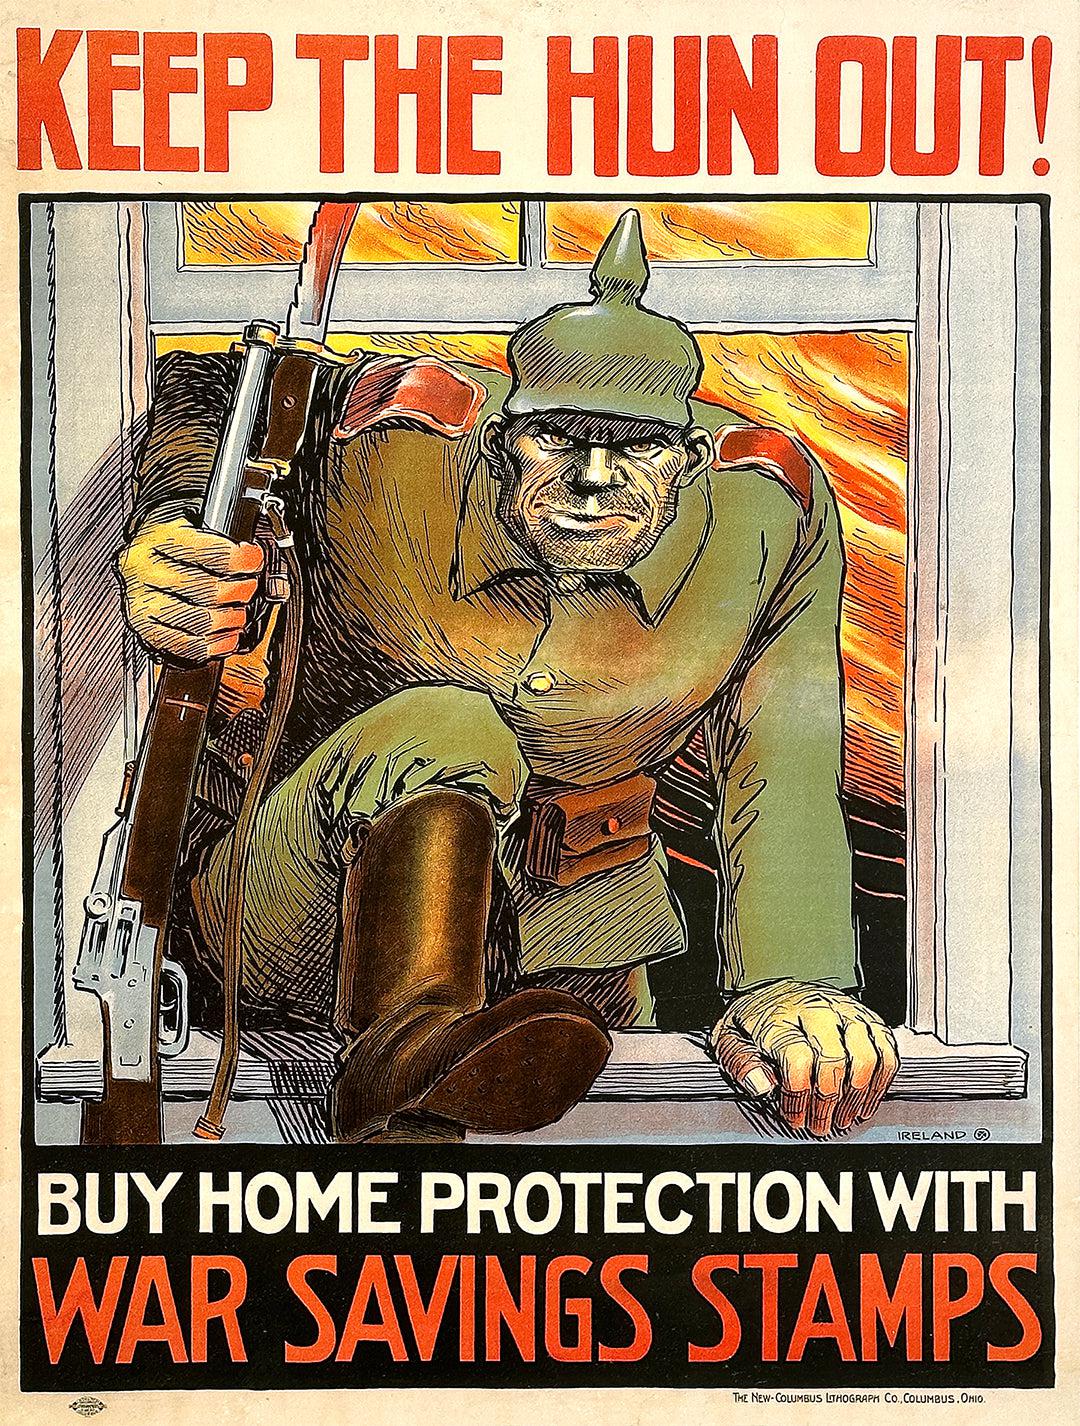 Original Vintage WWI War Savings Stamps Poster Keep the Hun Out by William  Ireland – The Ross Art Group